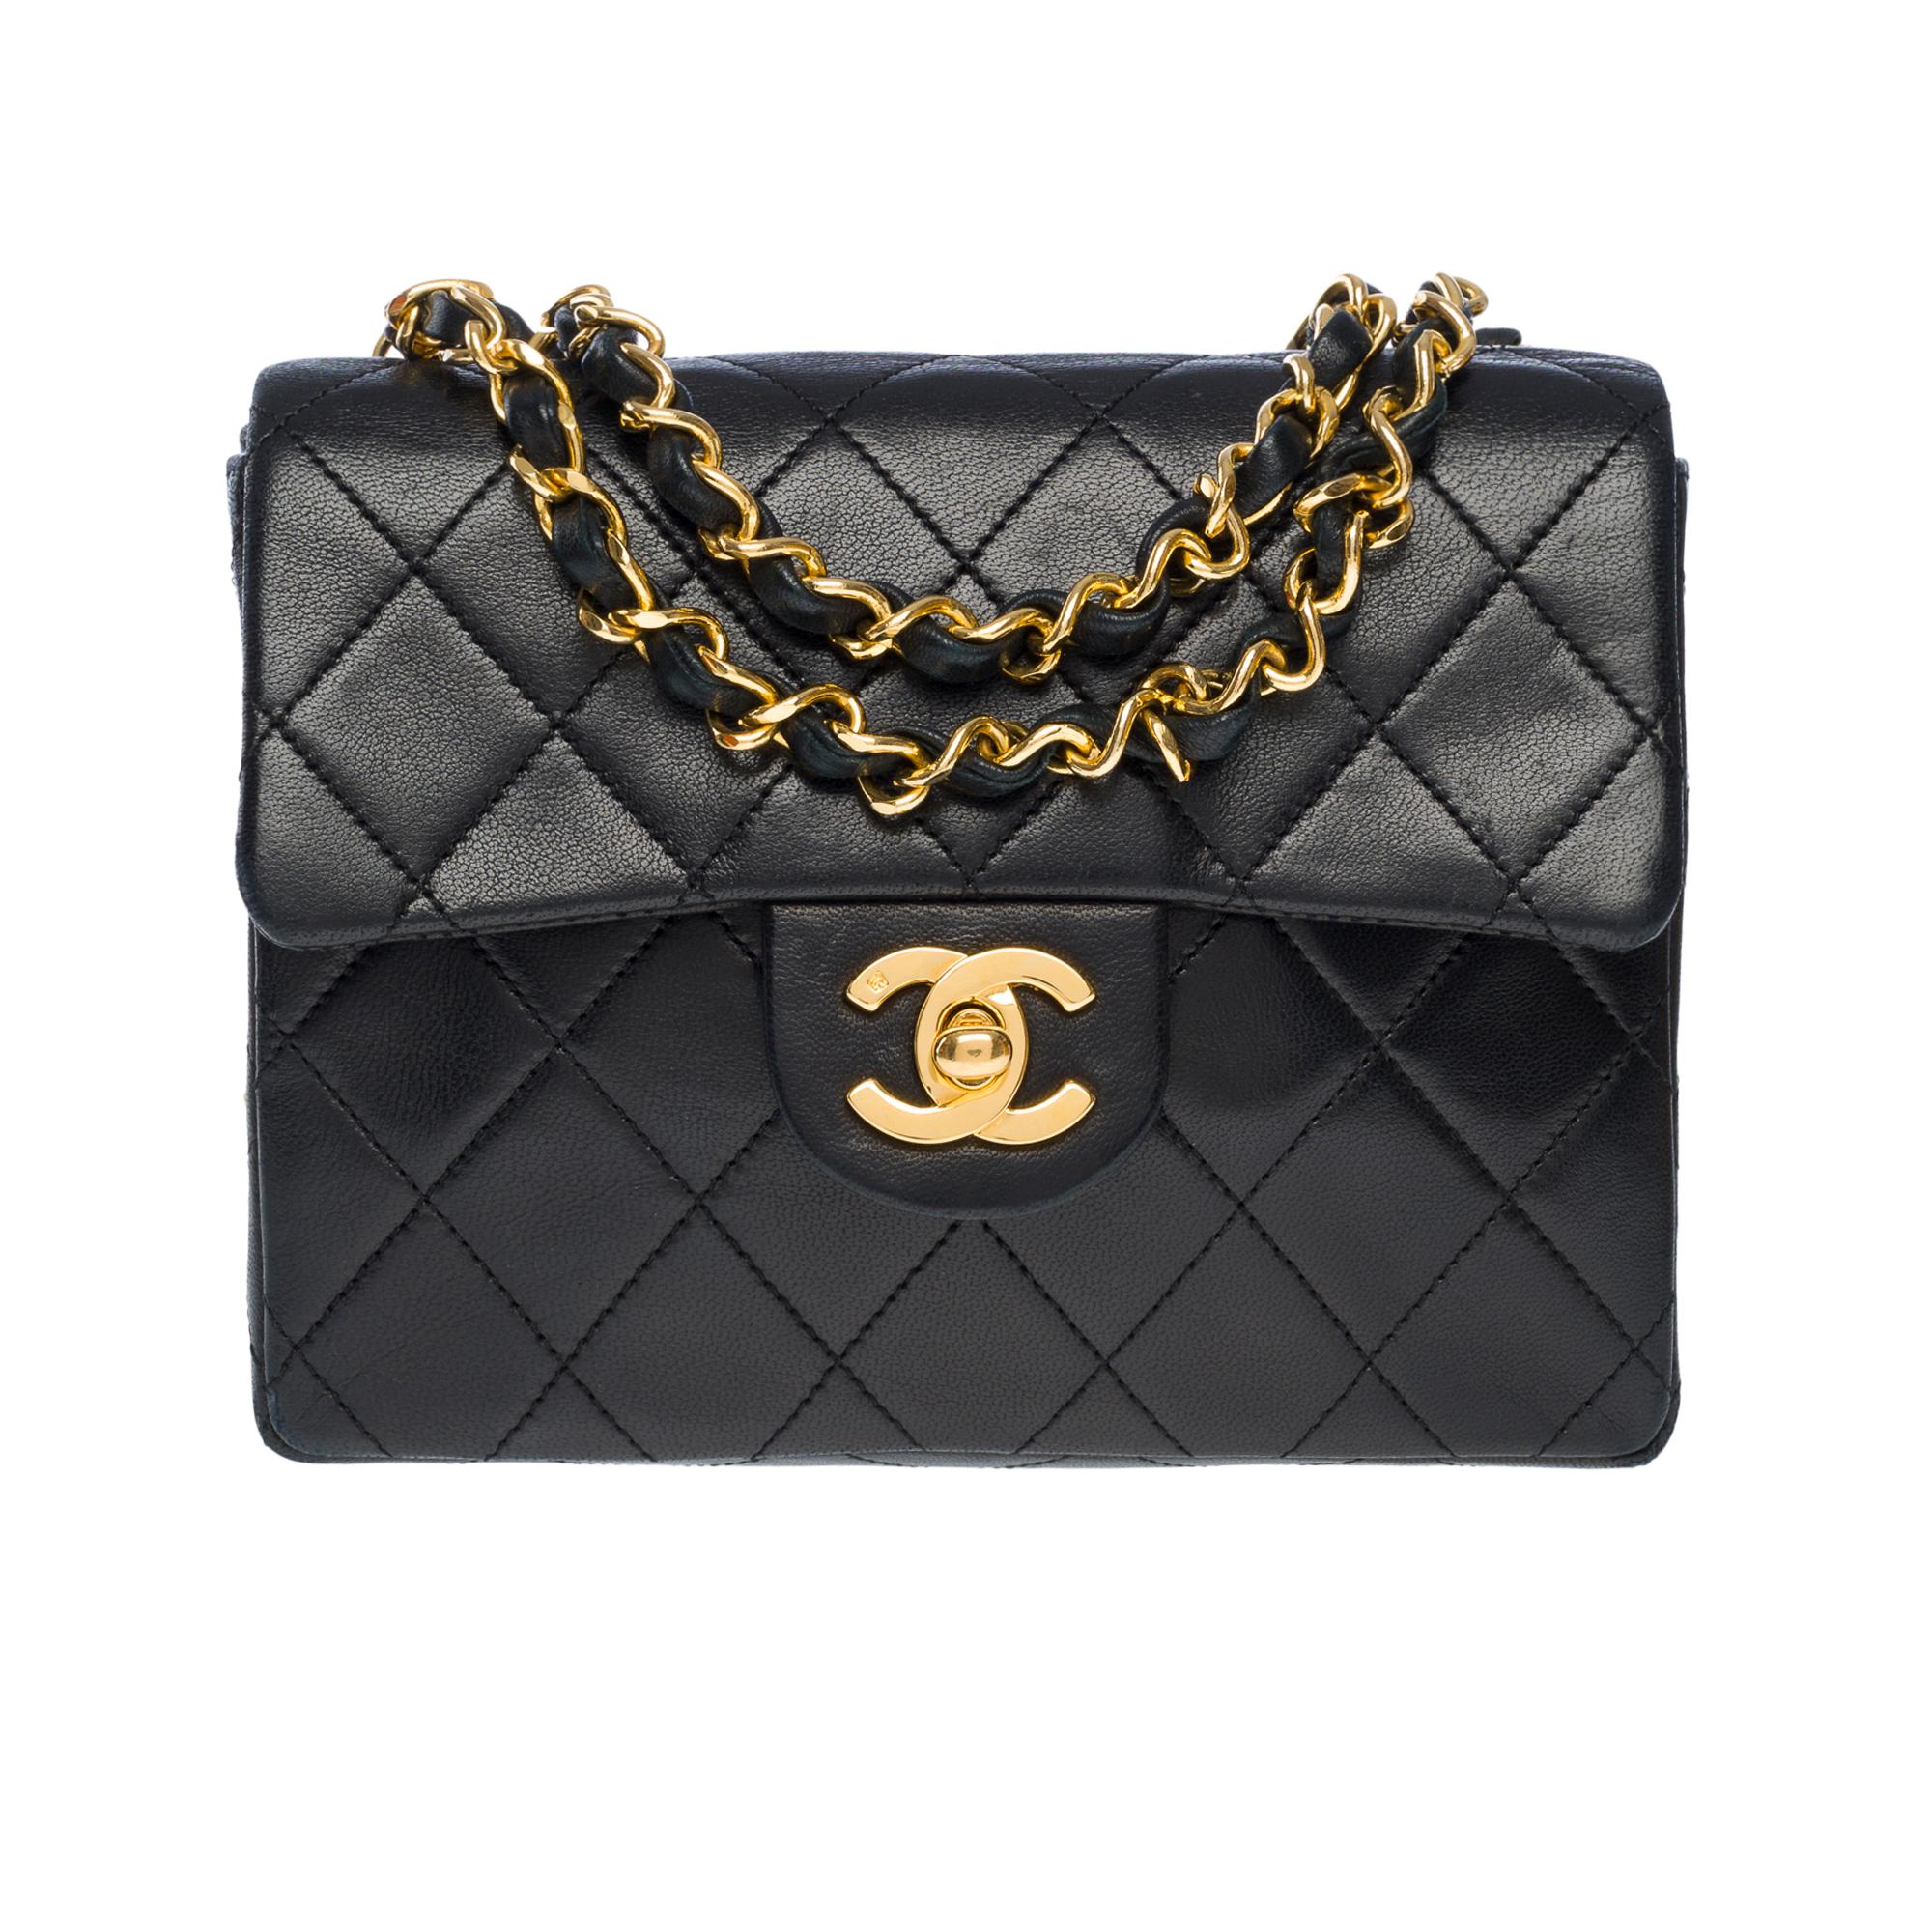 Exquisite Chanel Mini Timeless Square flap bag in black quilted lambskin leather, gold metal shoulder strap interlaced with black lambskin leather for a hand, shoulder or crossbody carry

Single flap
Flap closure and CC closure by turnstile in gold